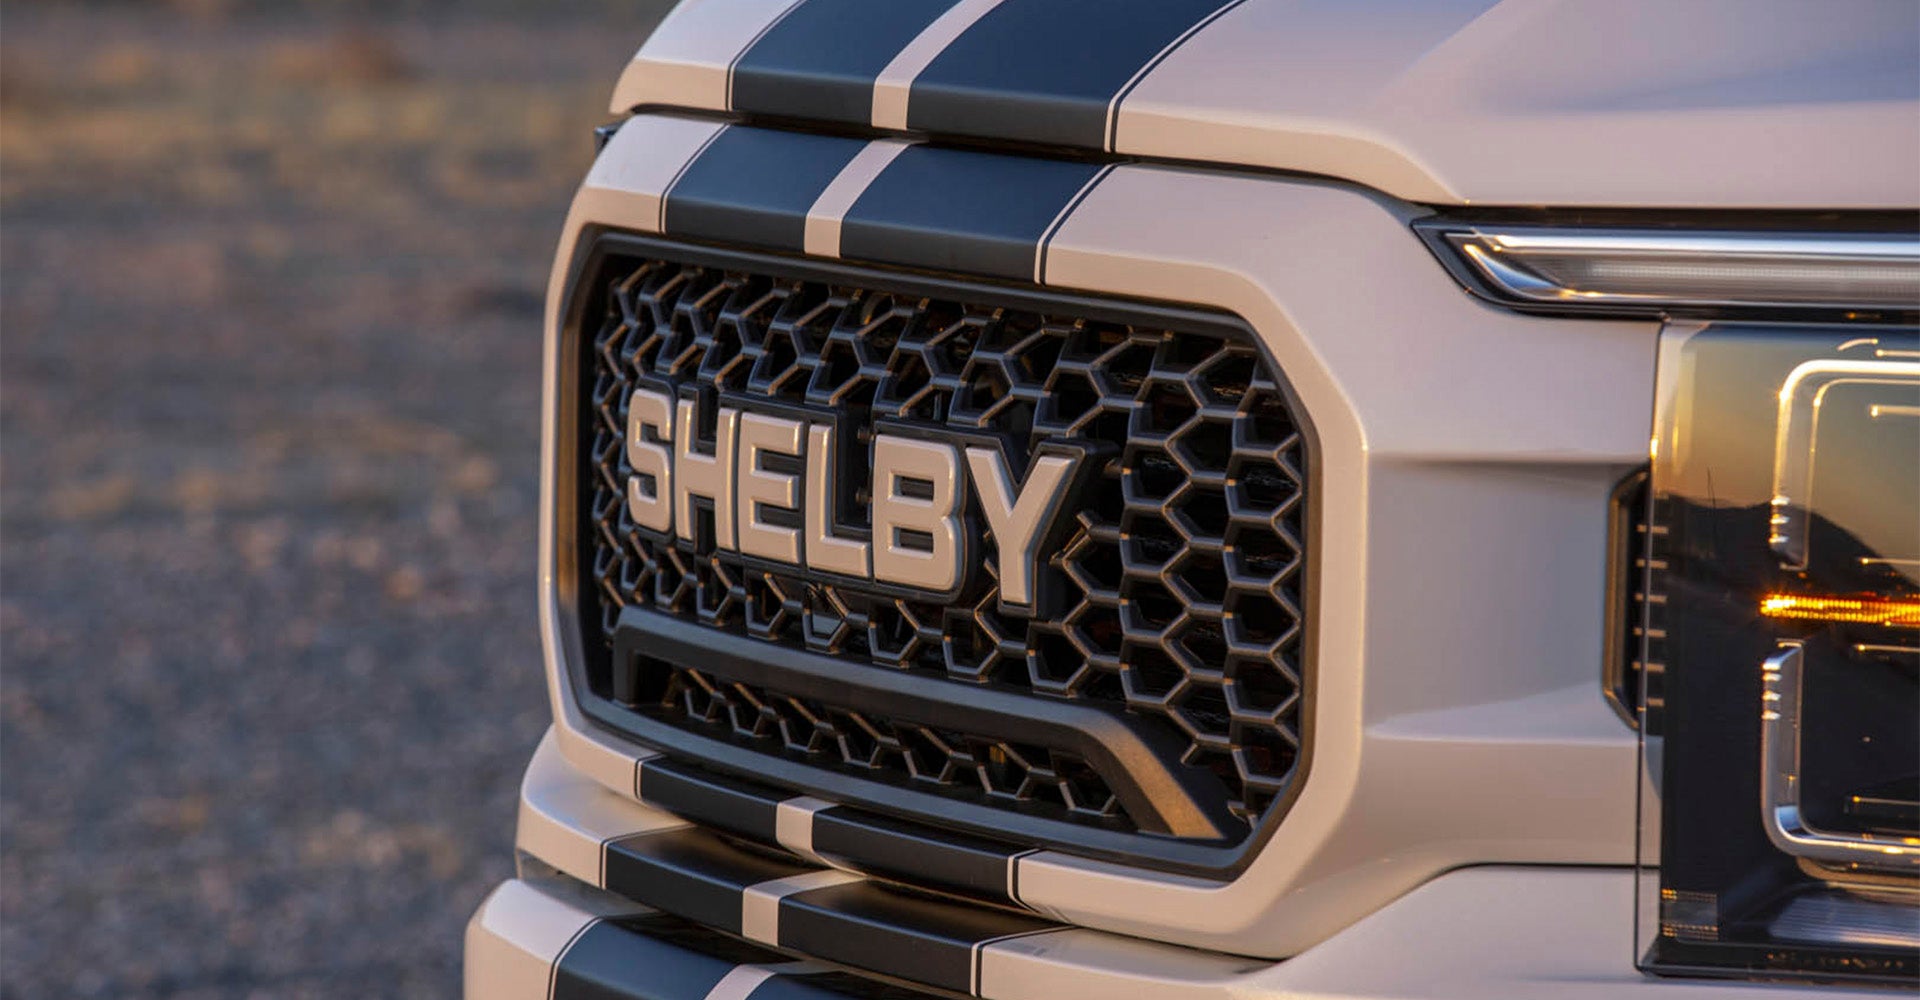 Shelby American Ford Trucks